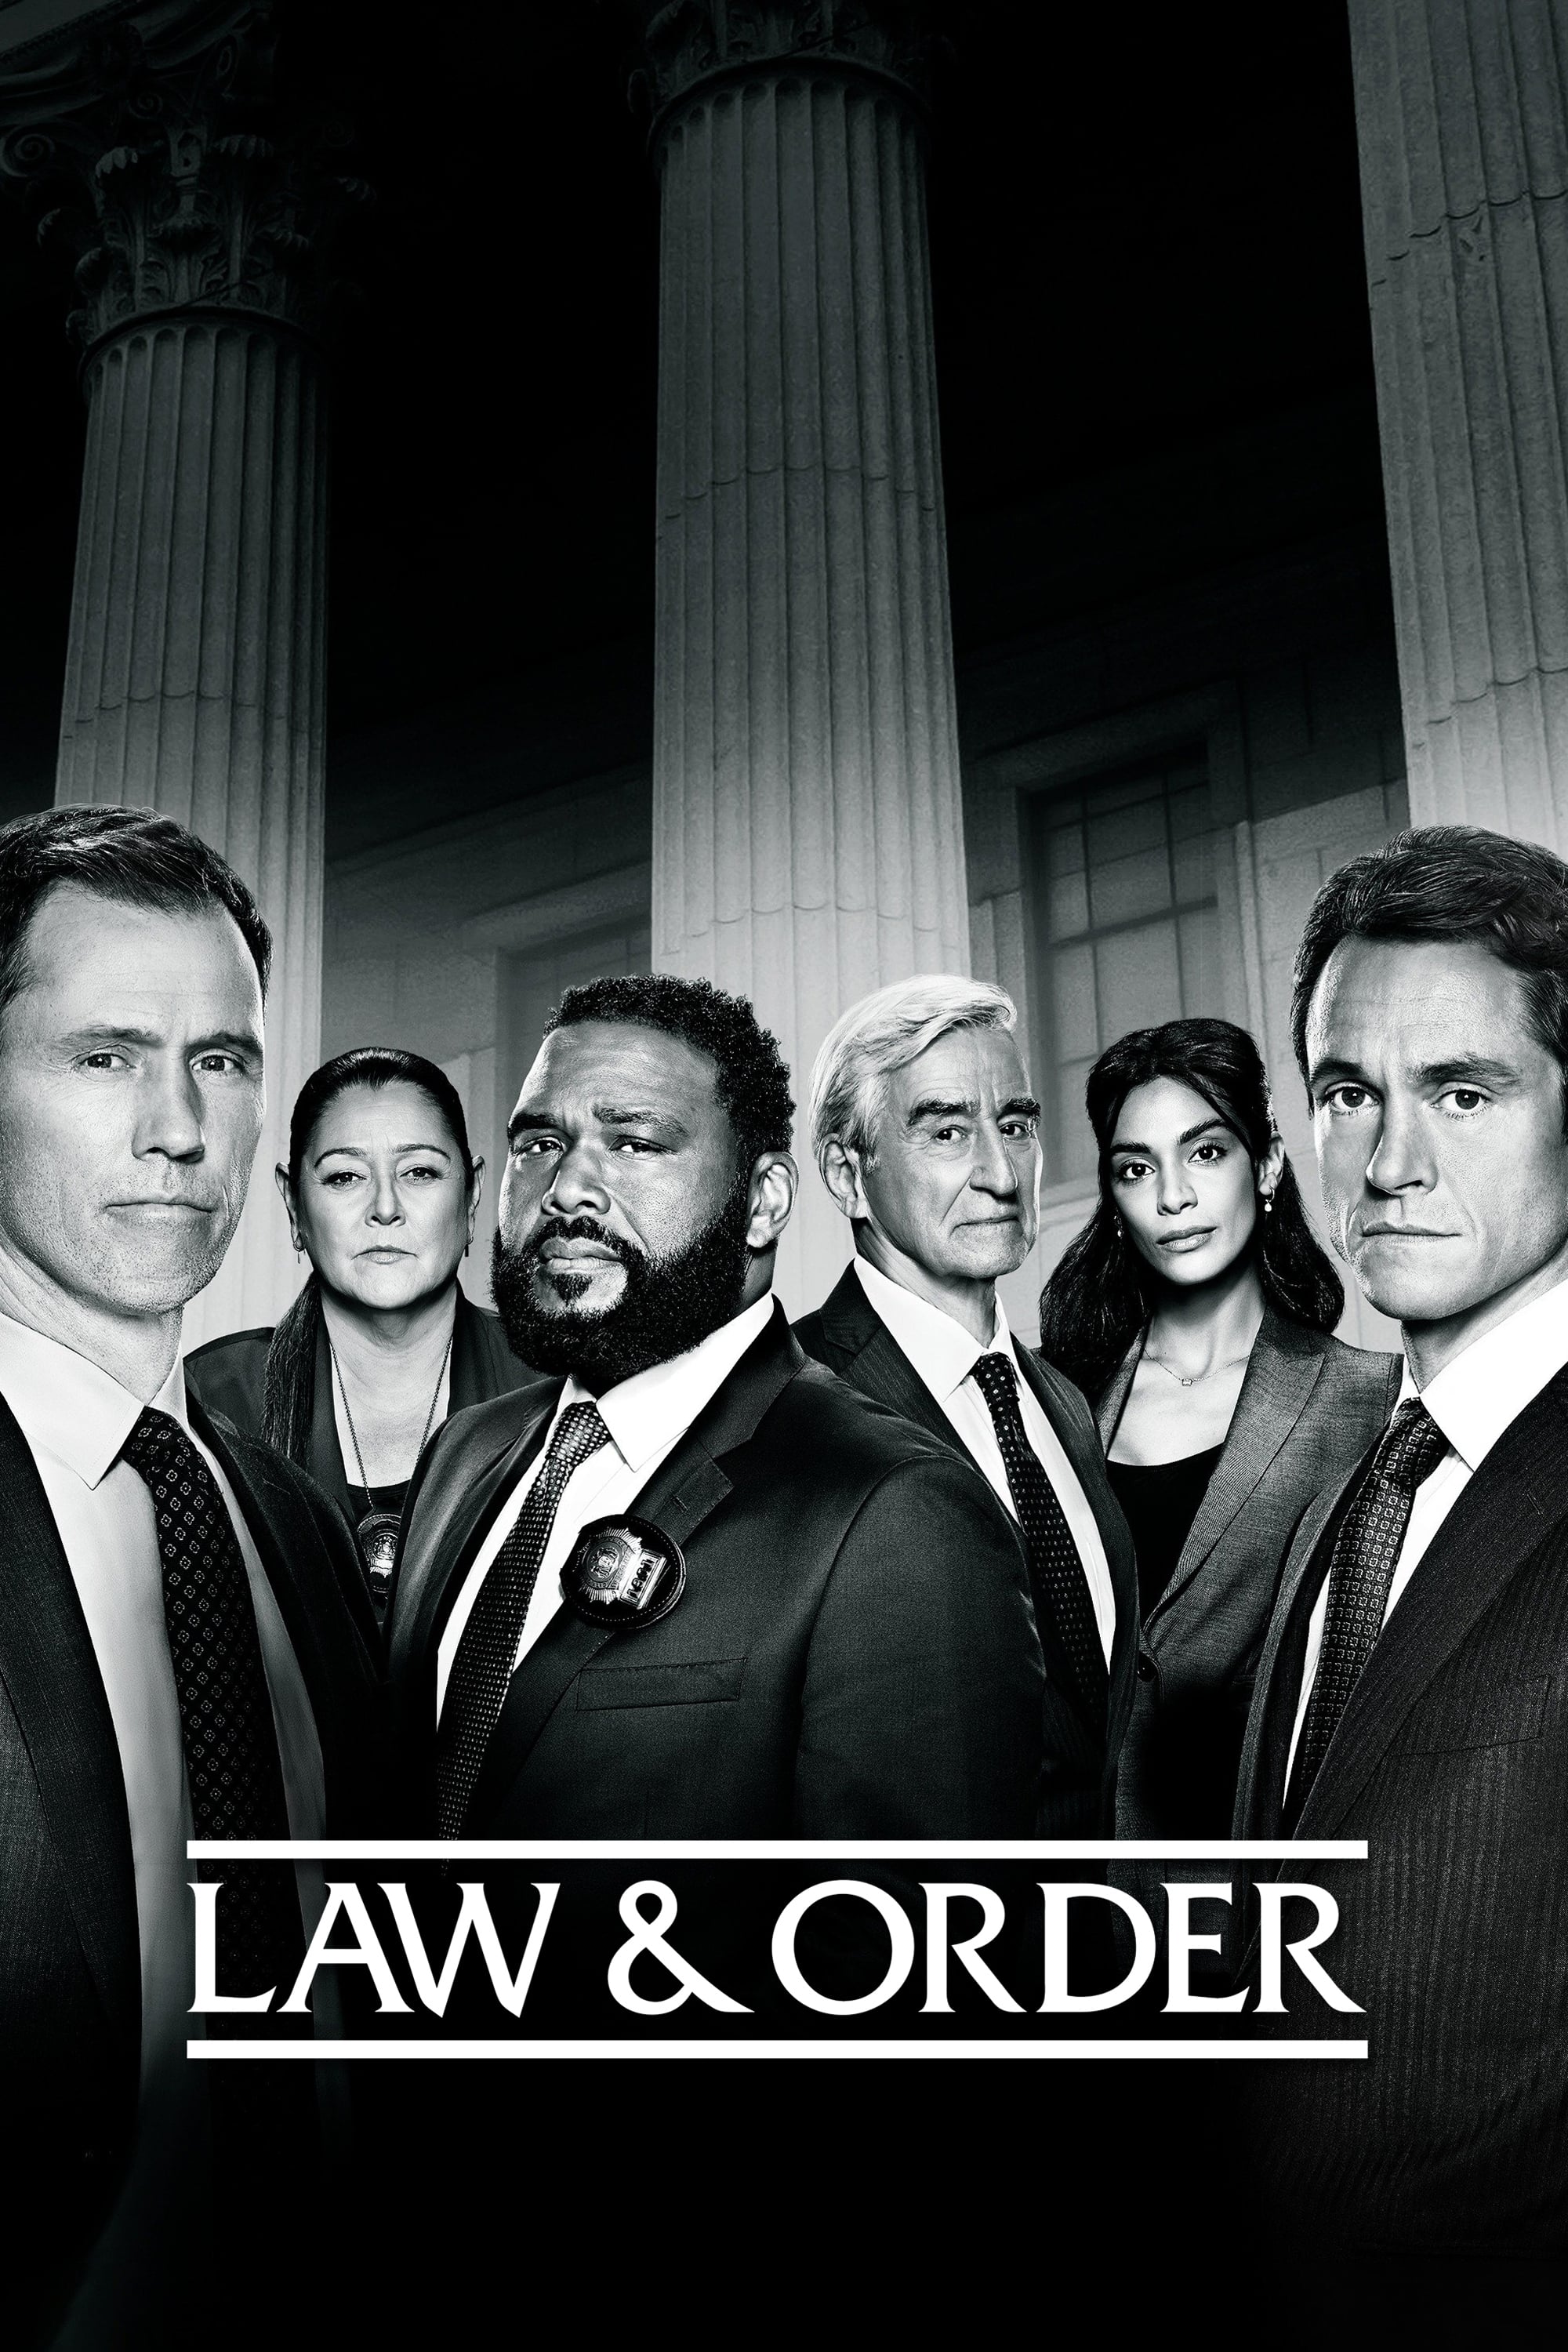 Law & Order TV Shows About Homicide Detective